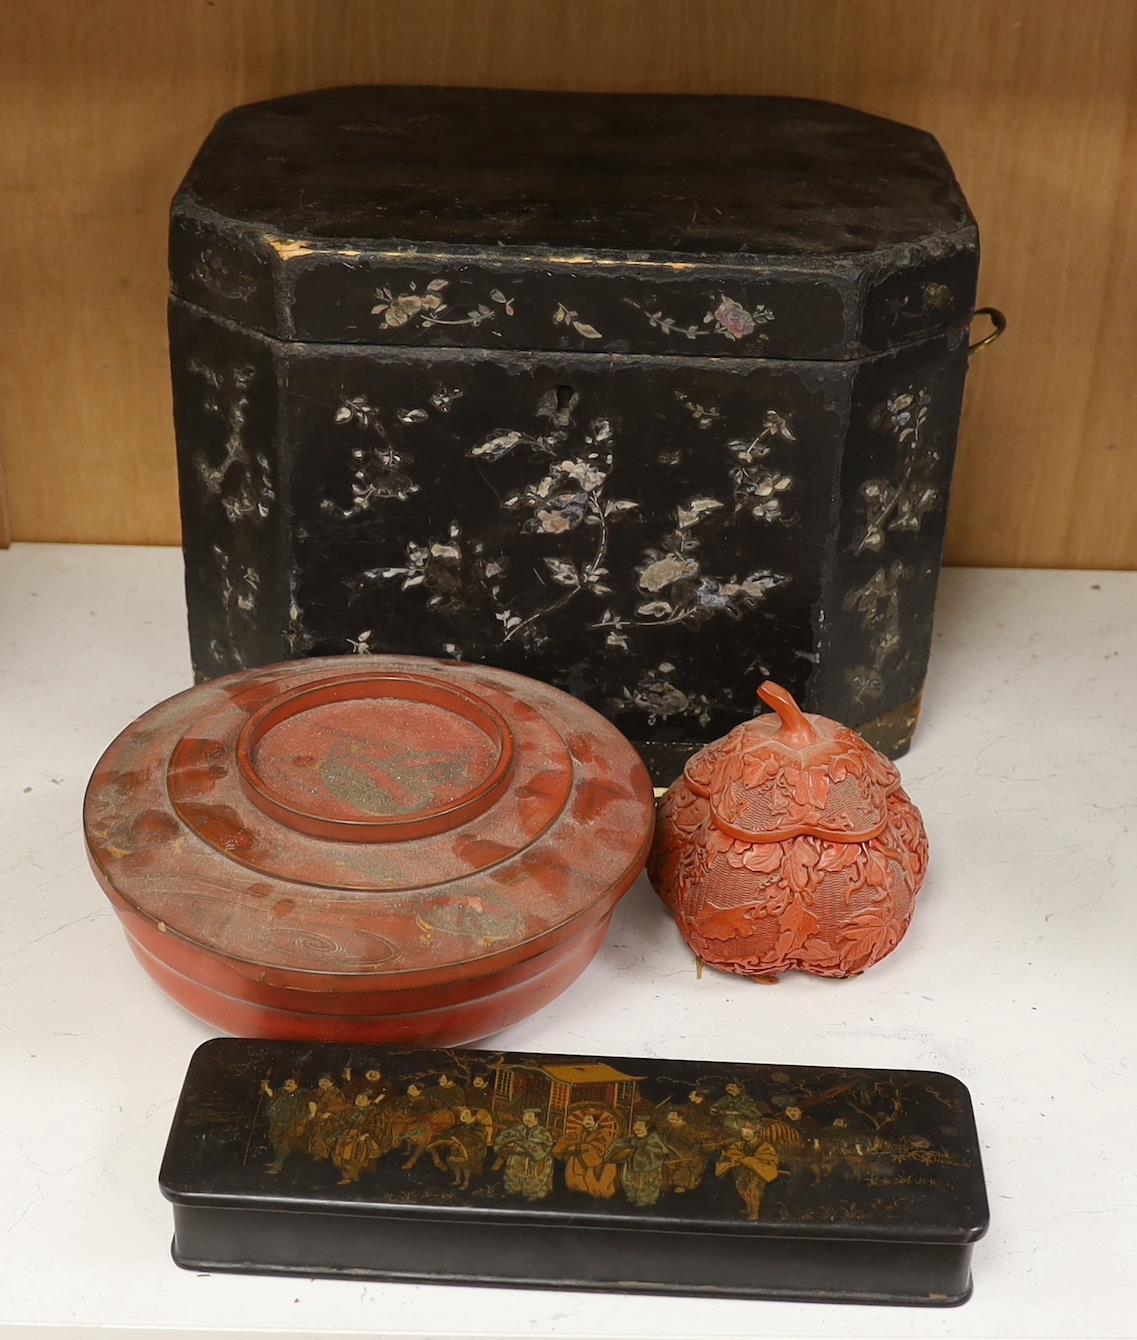 A Chinese black lacquer and mother of pearl box, two red lacquer boxes and a Chinoiserie painted